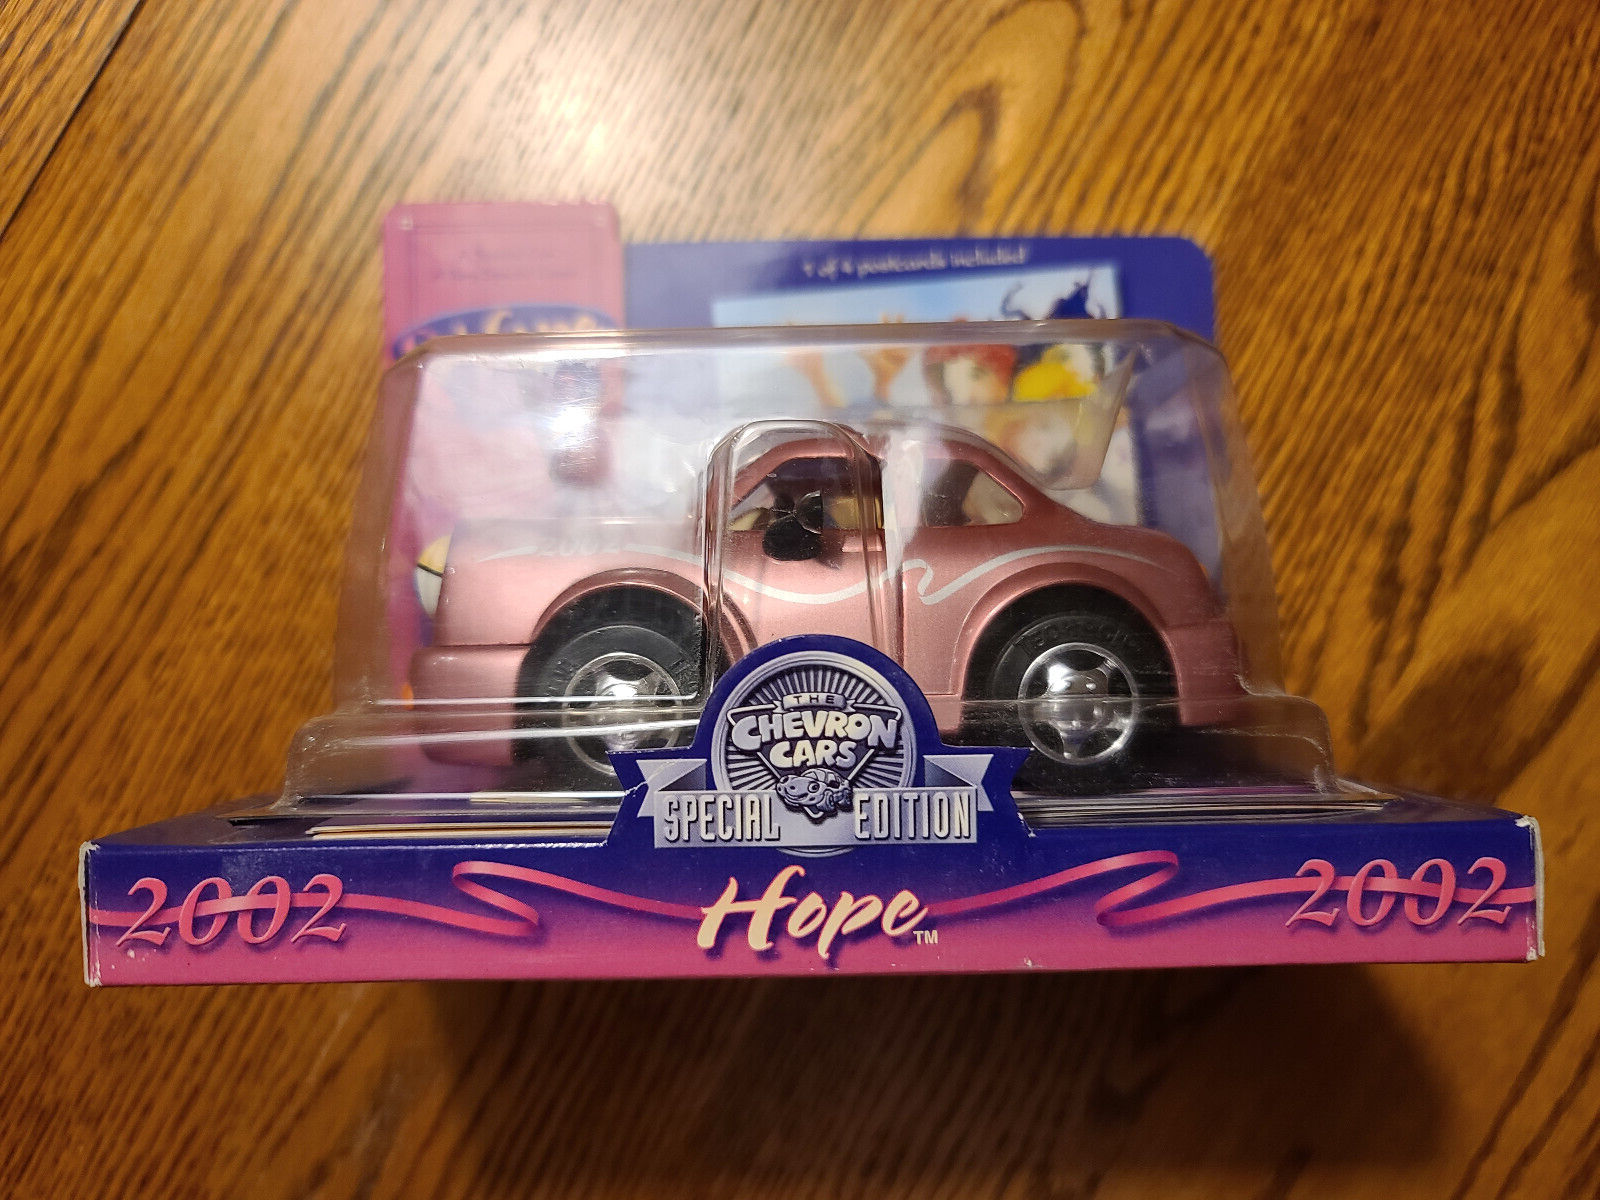 2002 HOPE Special Edition Chevron Car Collectible Toy Car *Sealed* Breast Cancer - $24.99